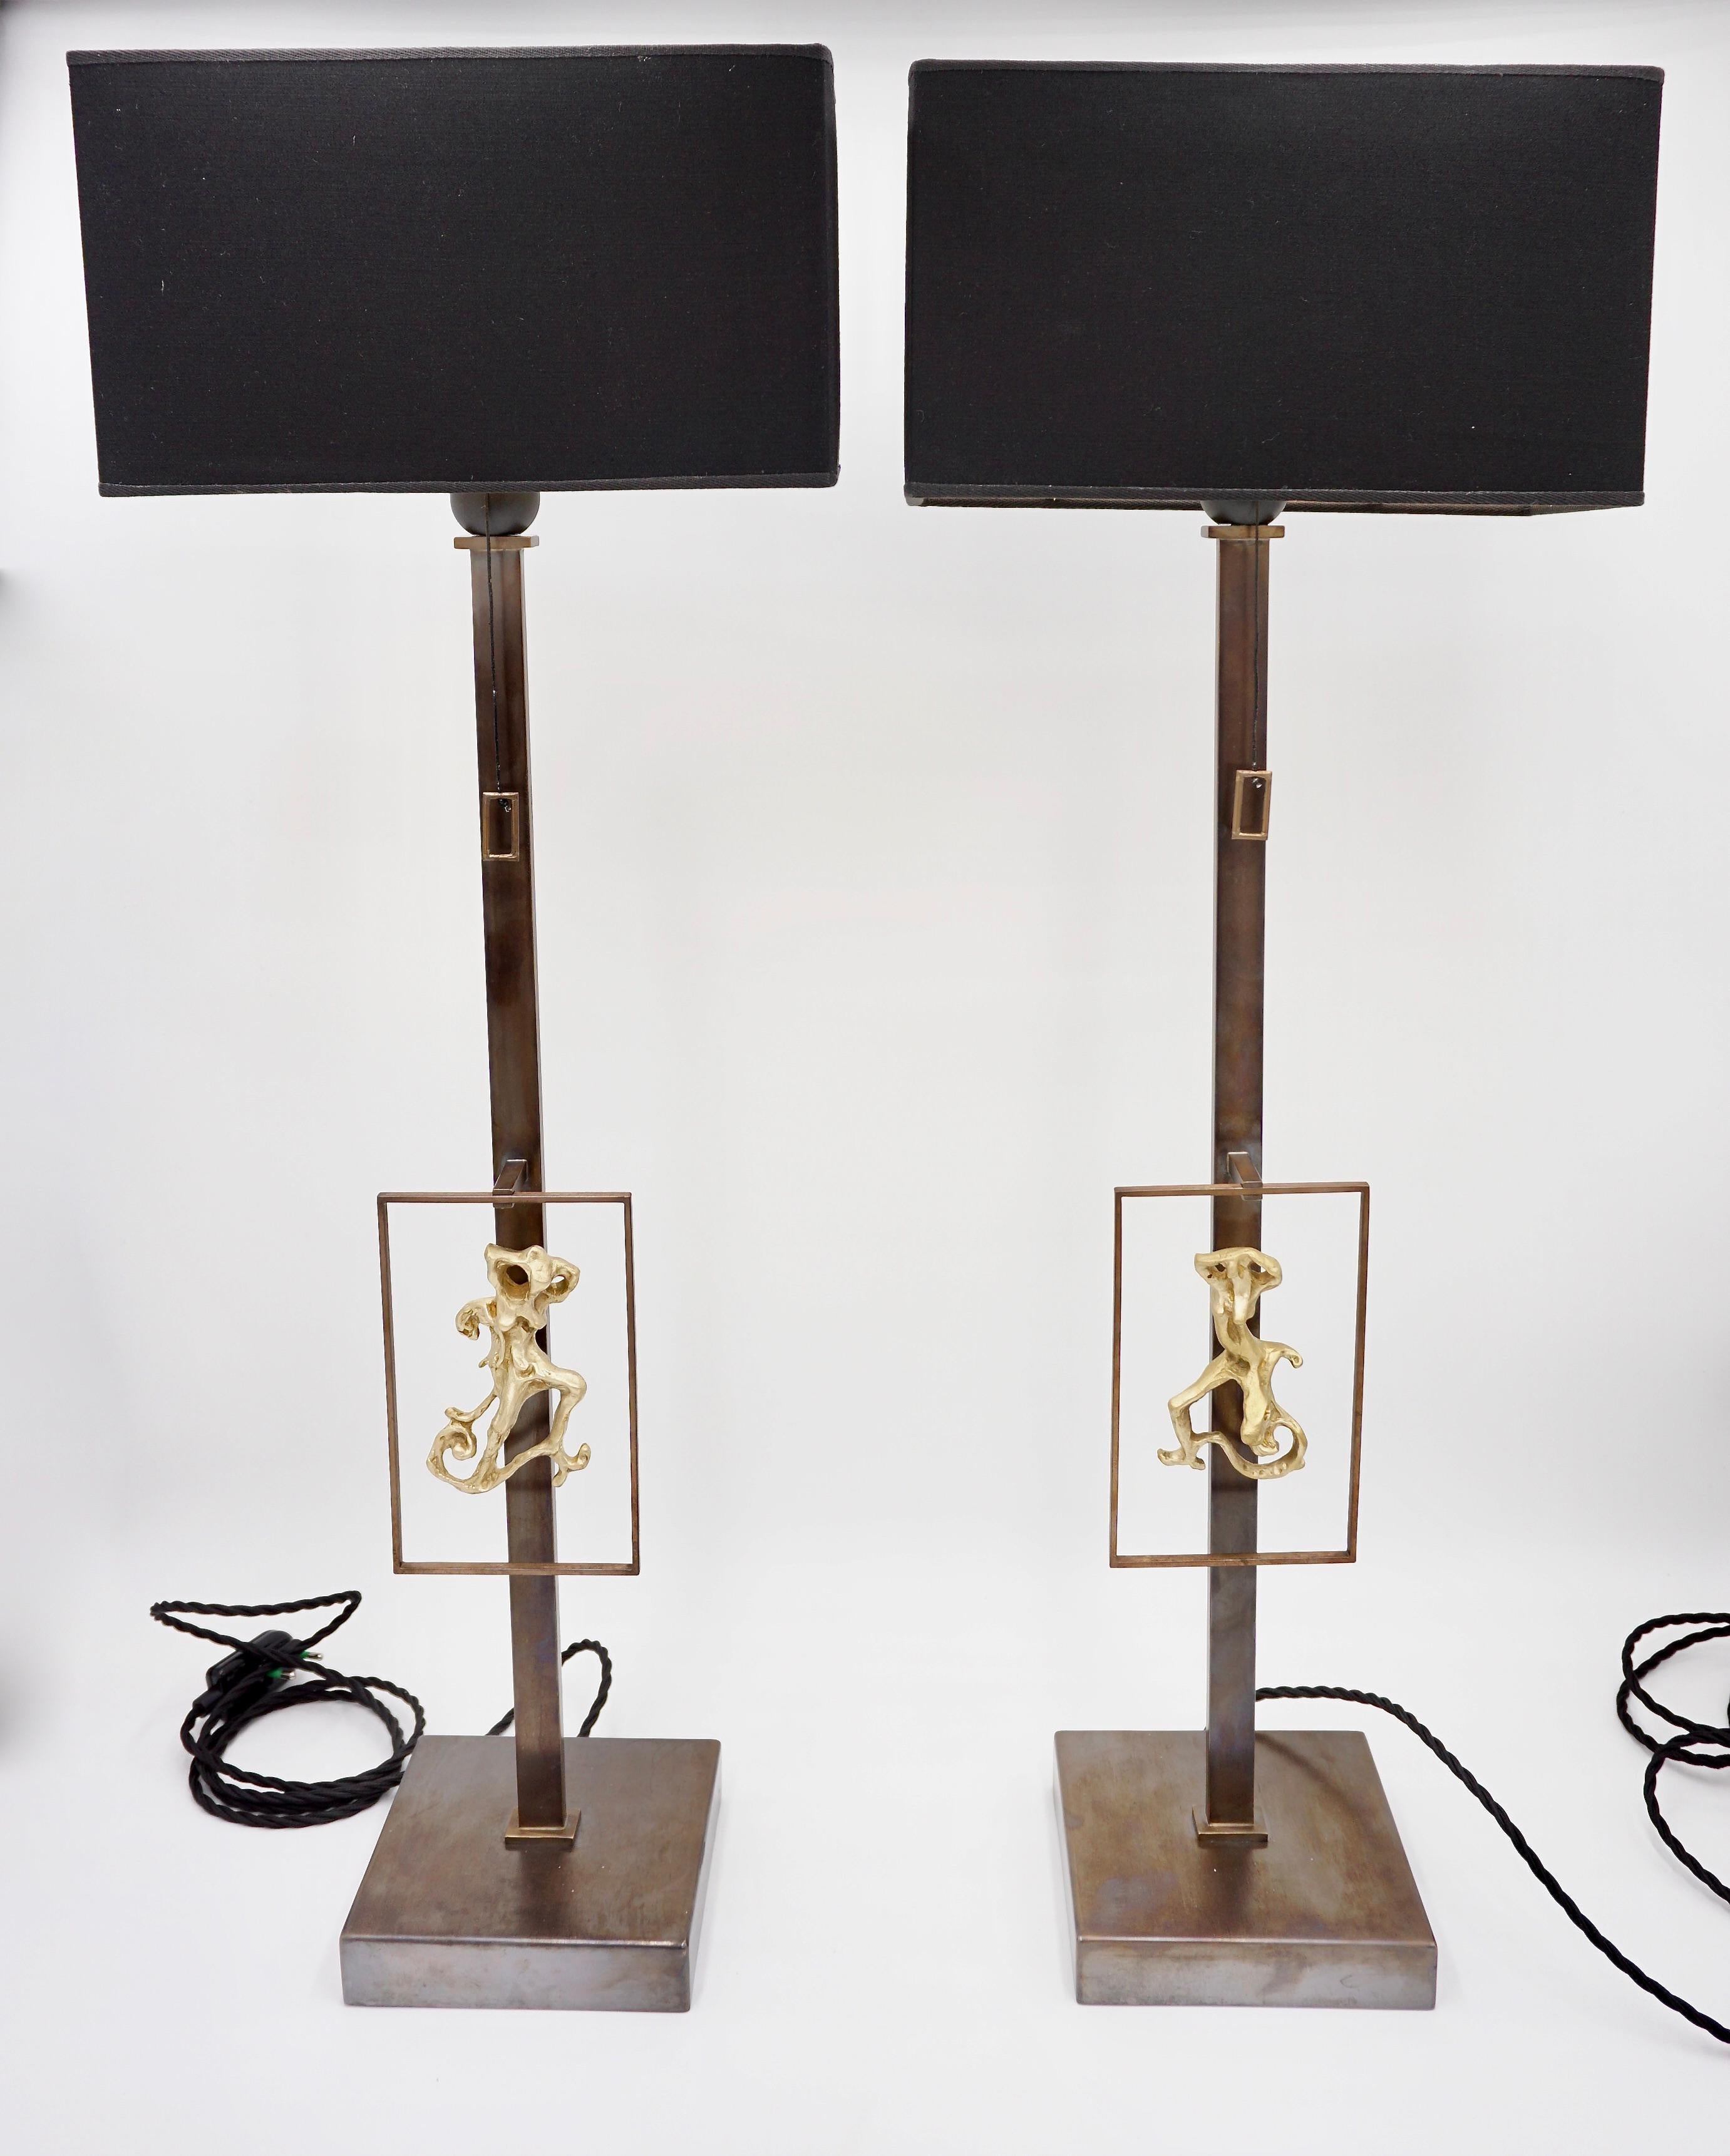 The table lamps designed by Lorenzo Ciompi for series Masterpieces of Lights